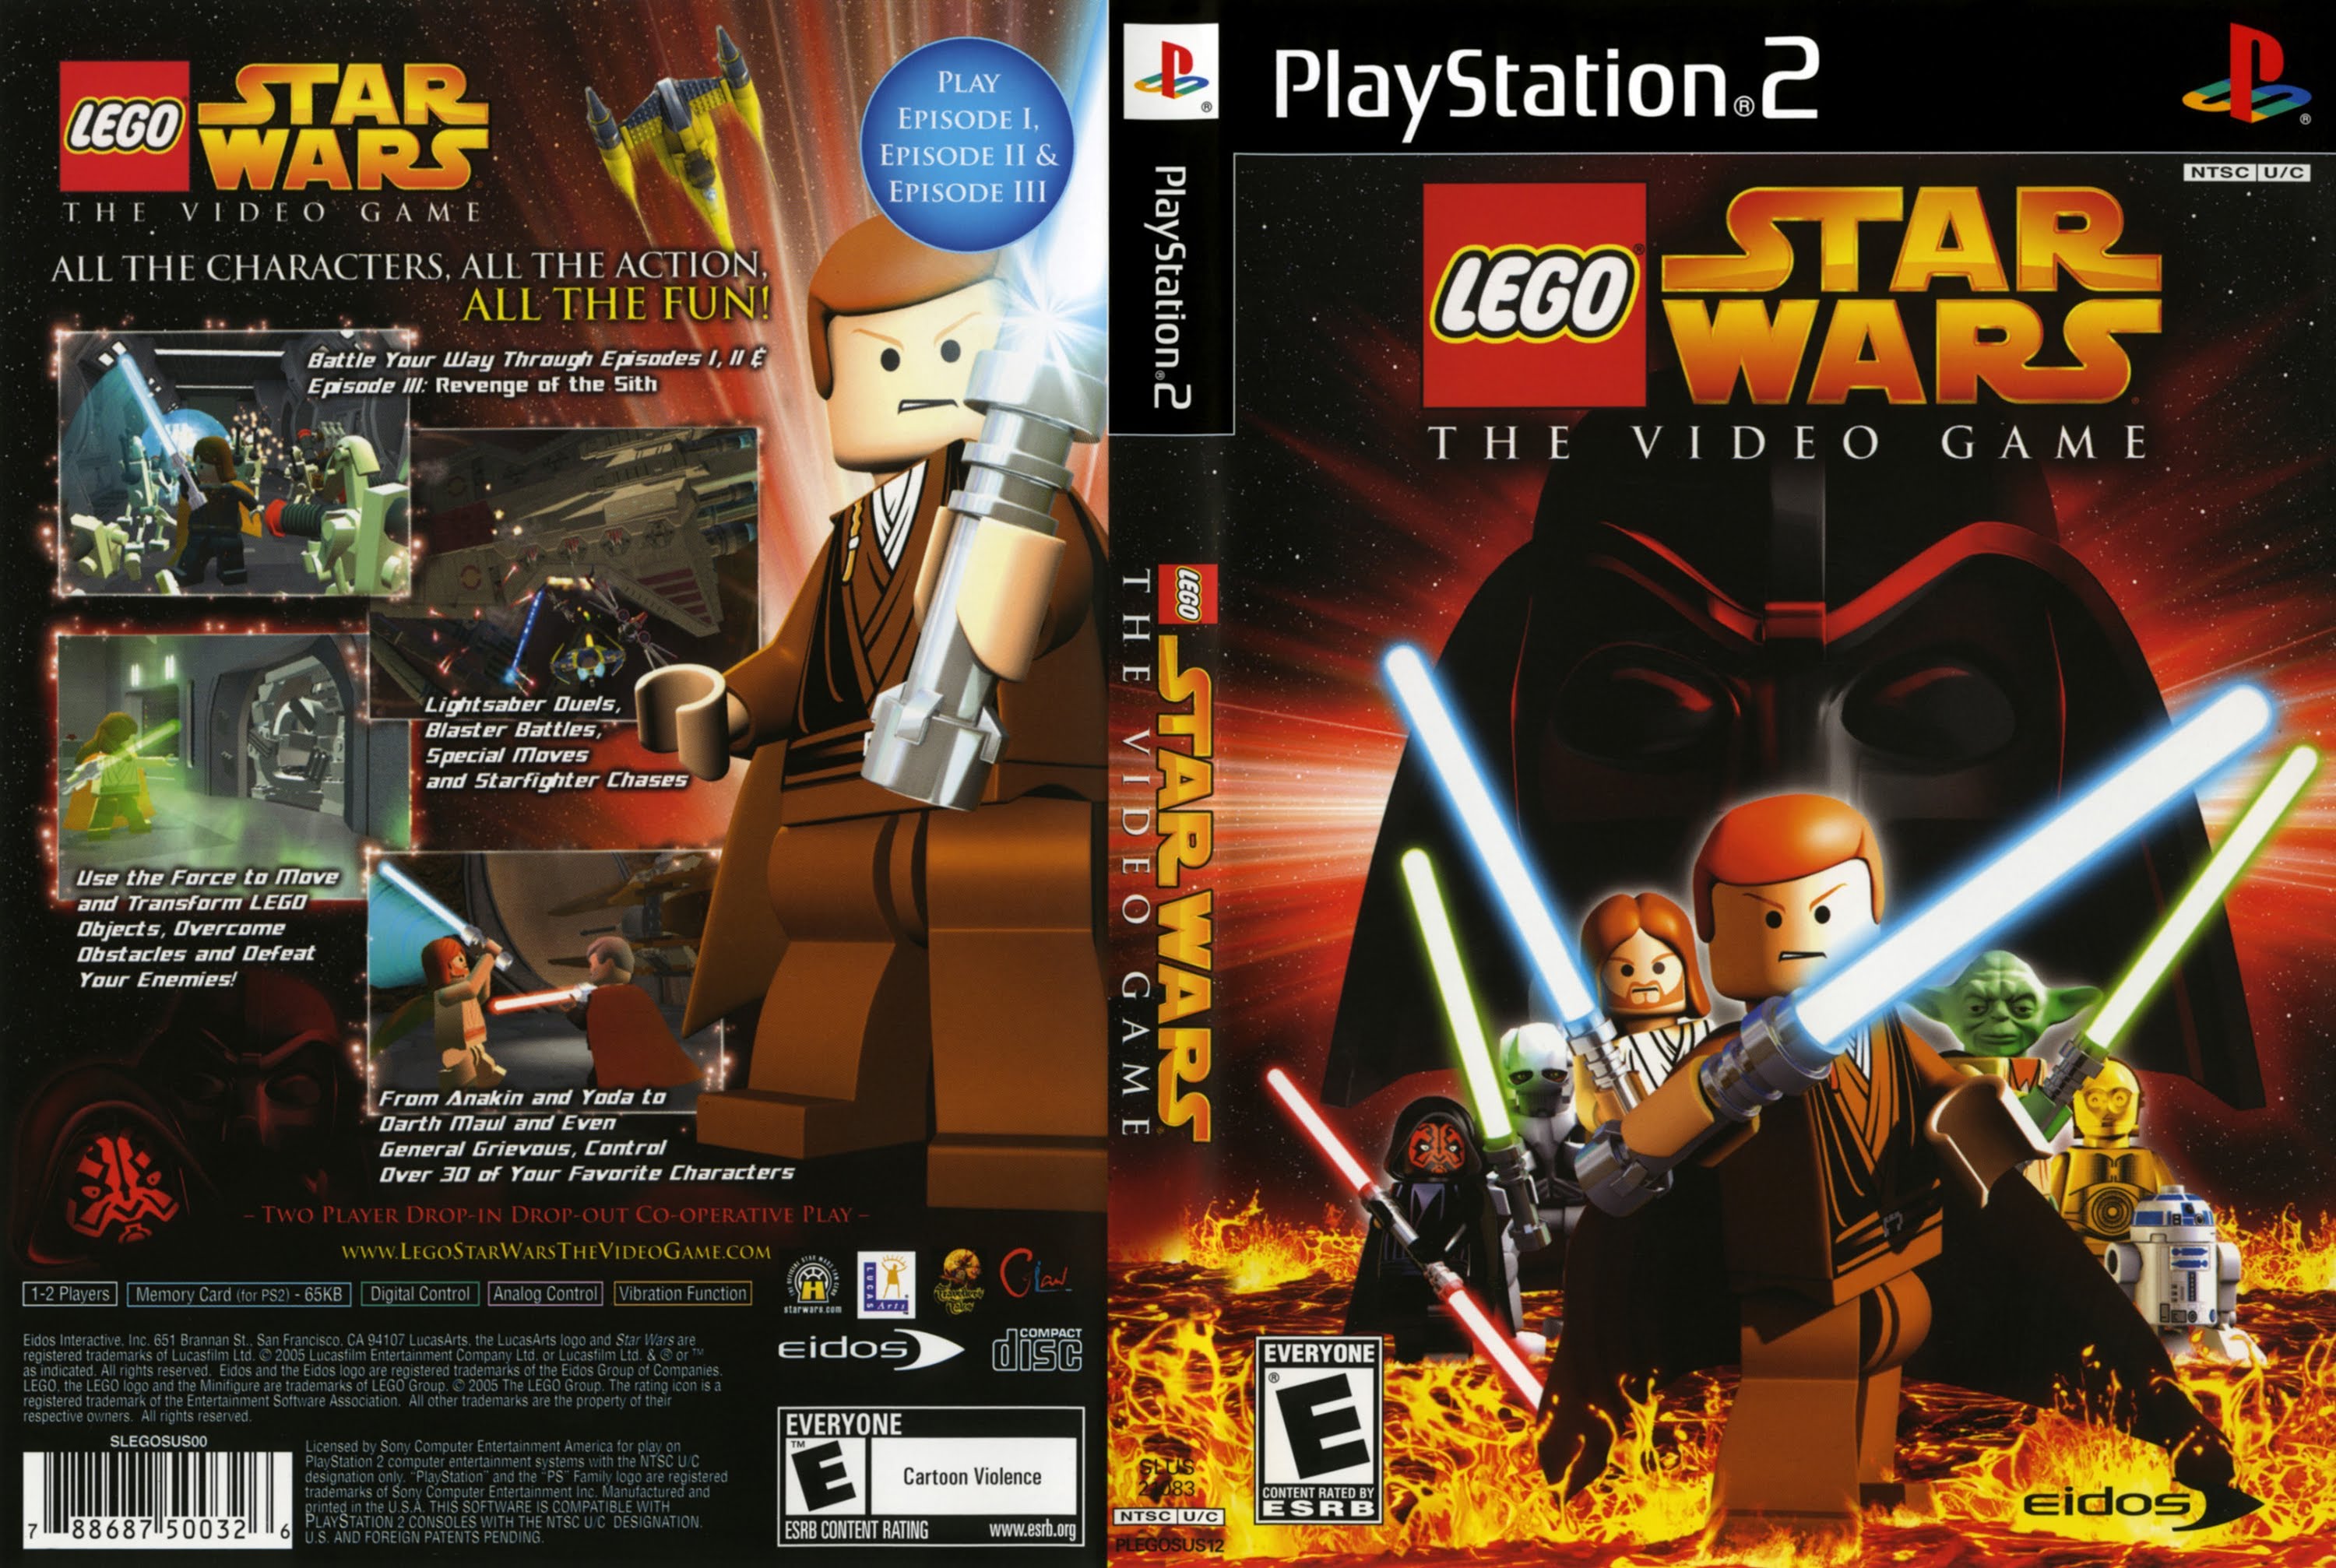 lego star wars 3 pc games free download